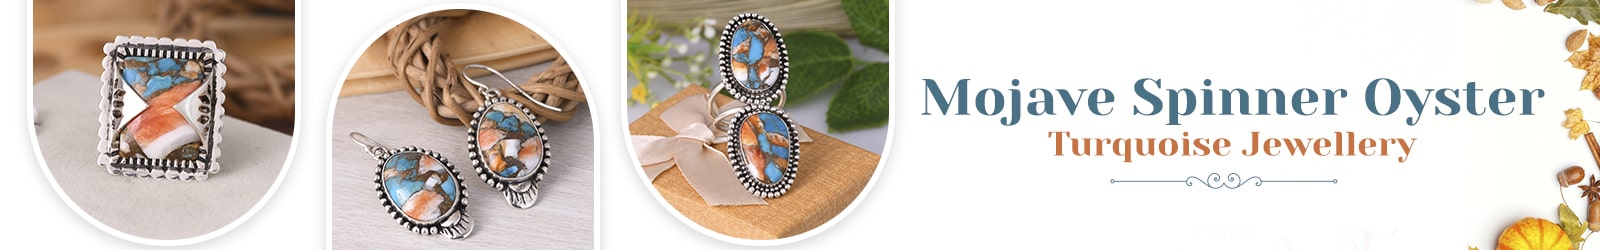 Mojave Spinner Oyster Turquoise Jewelry